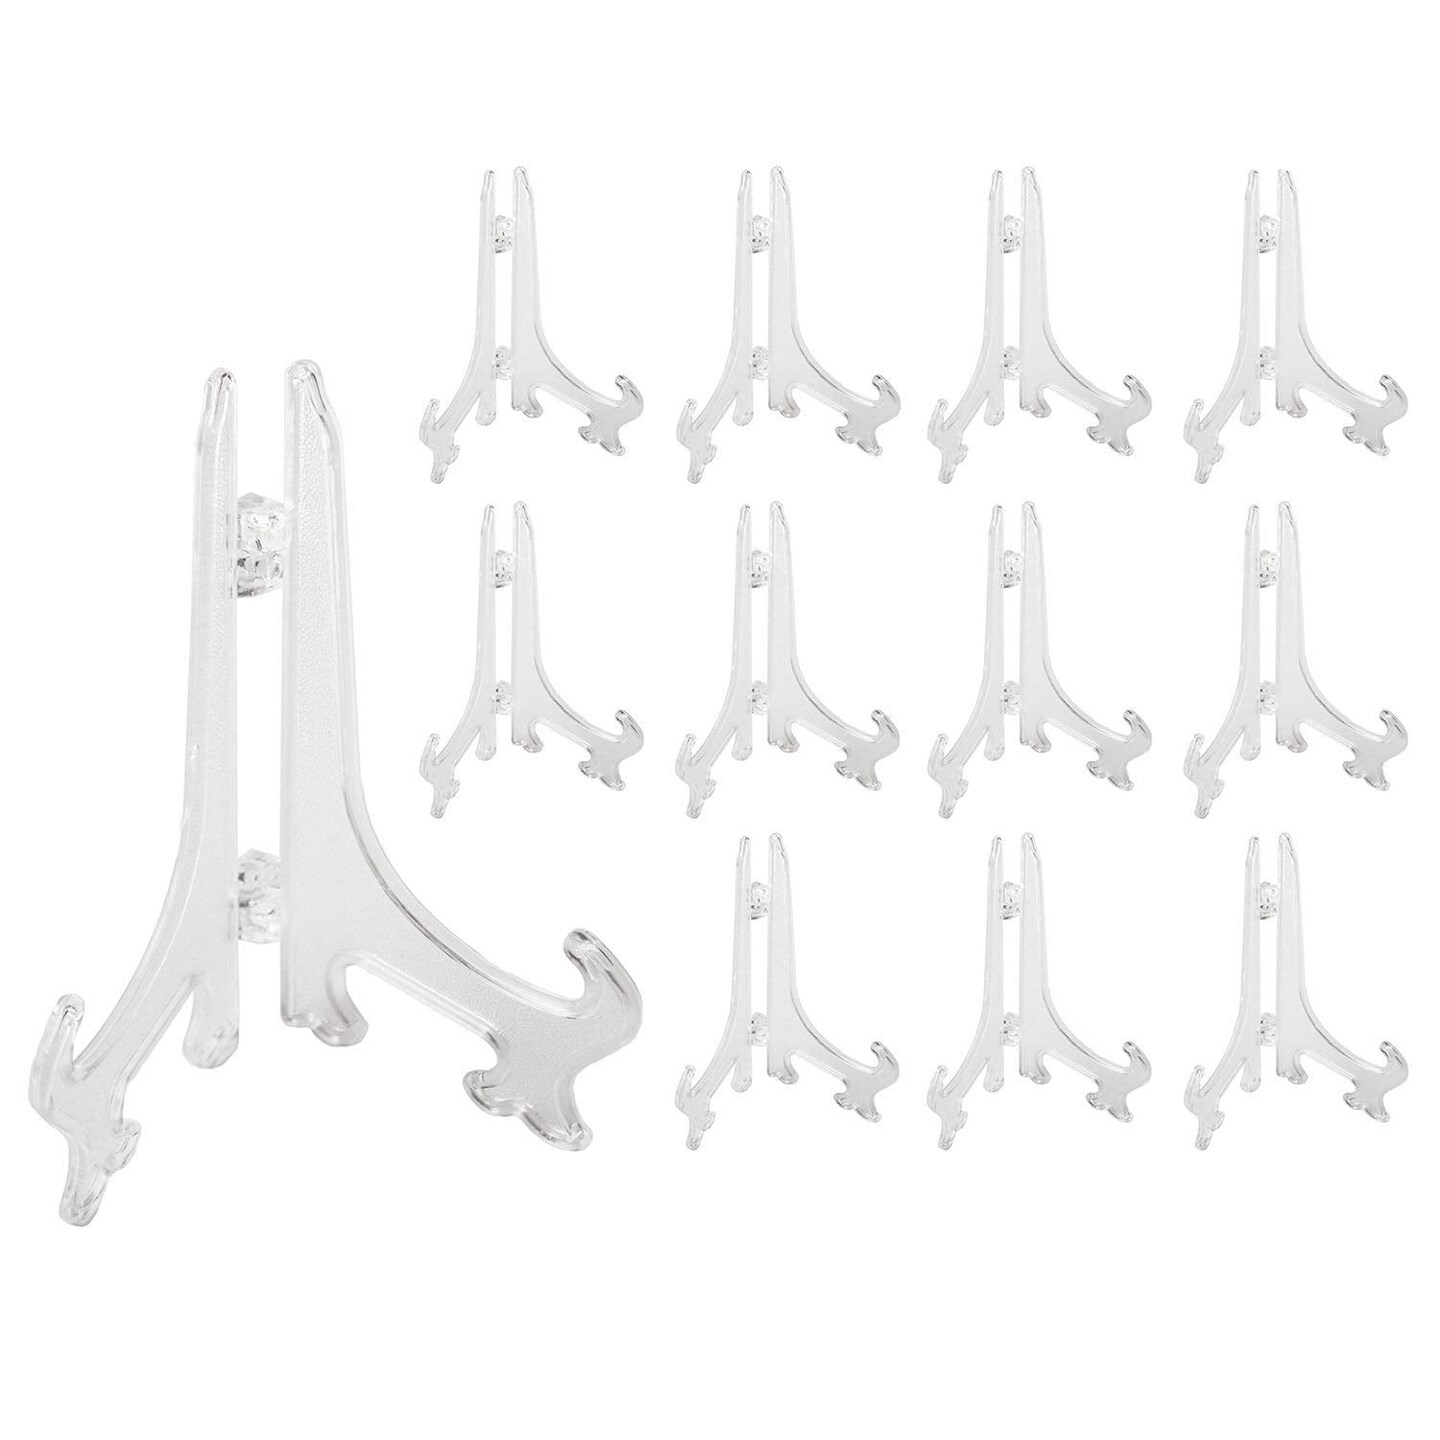 Super Z Outlet Plastic Easels 12 Pack Clear Easel Stands Easel Display Stand for Photo, Place Card, Collectibles, Light Items - Perfect for Wedding Cards, Party, Home, Party Decorations (3 Inches)